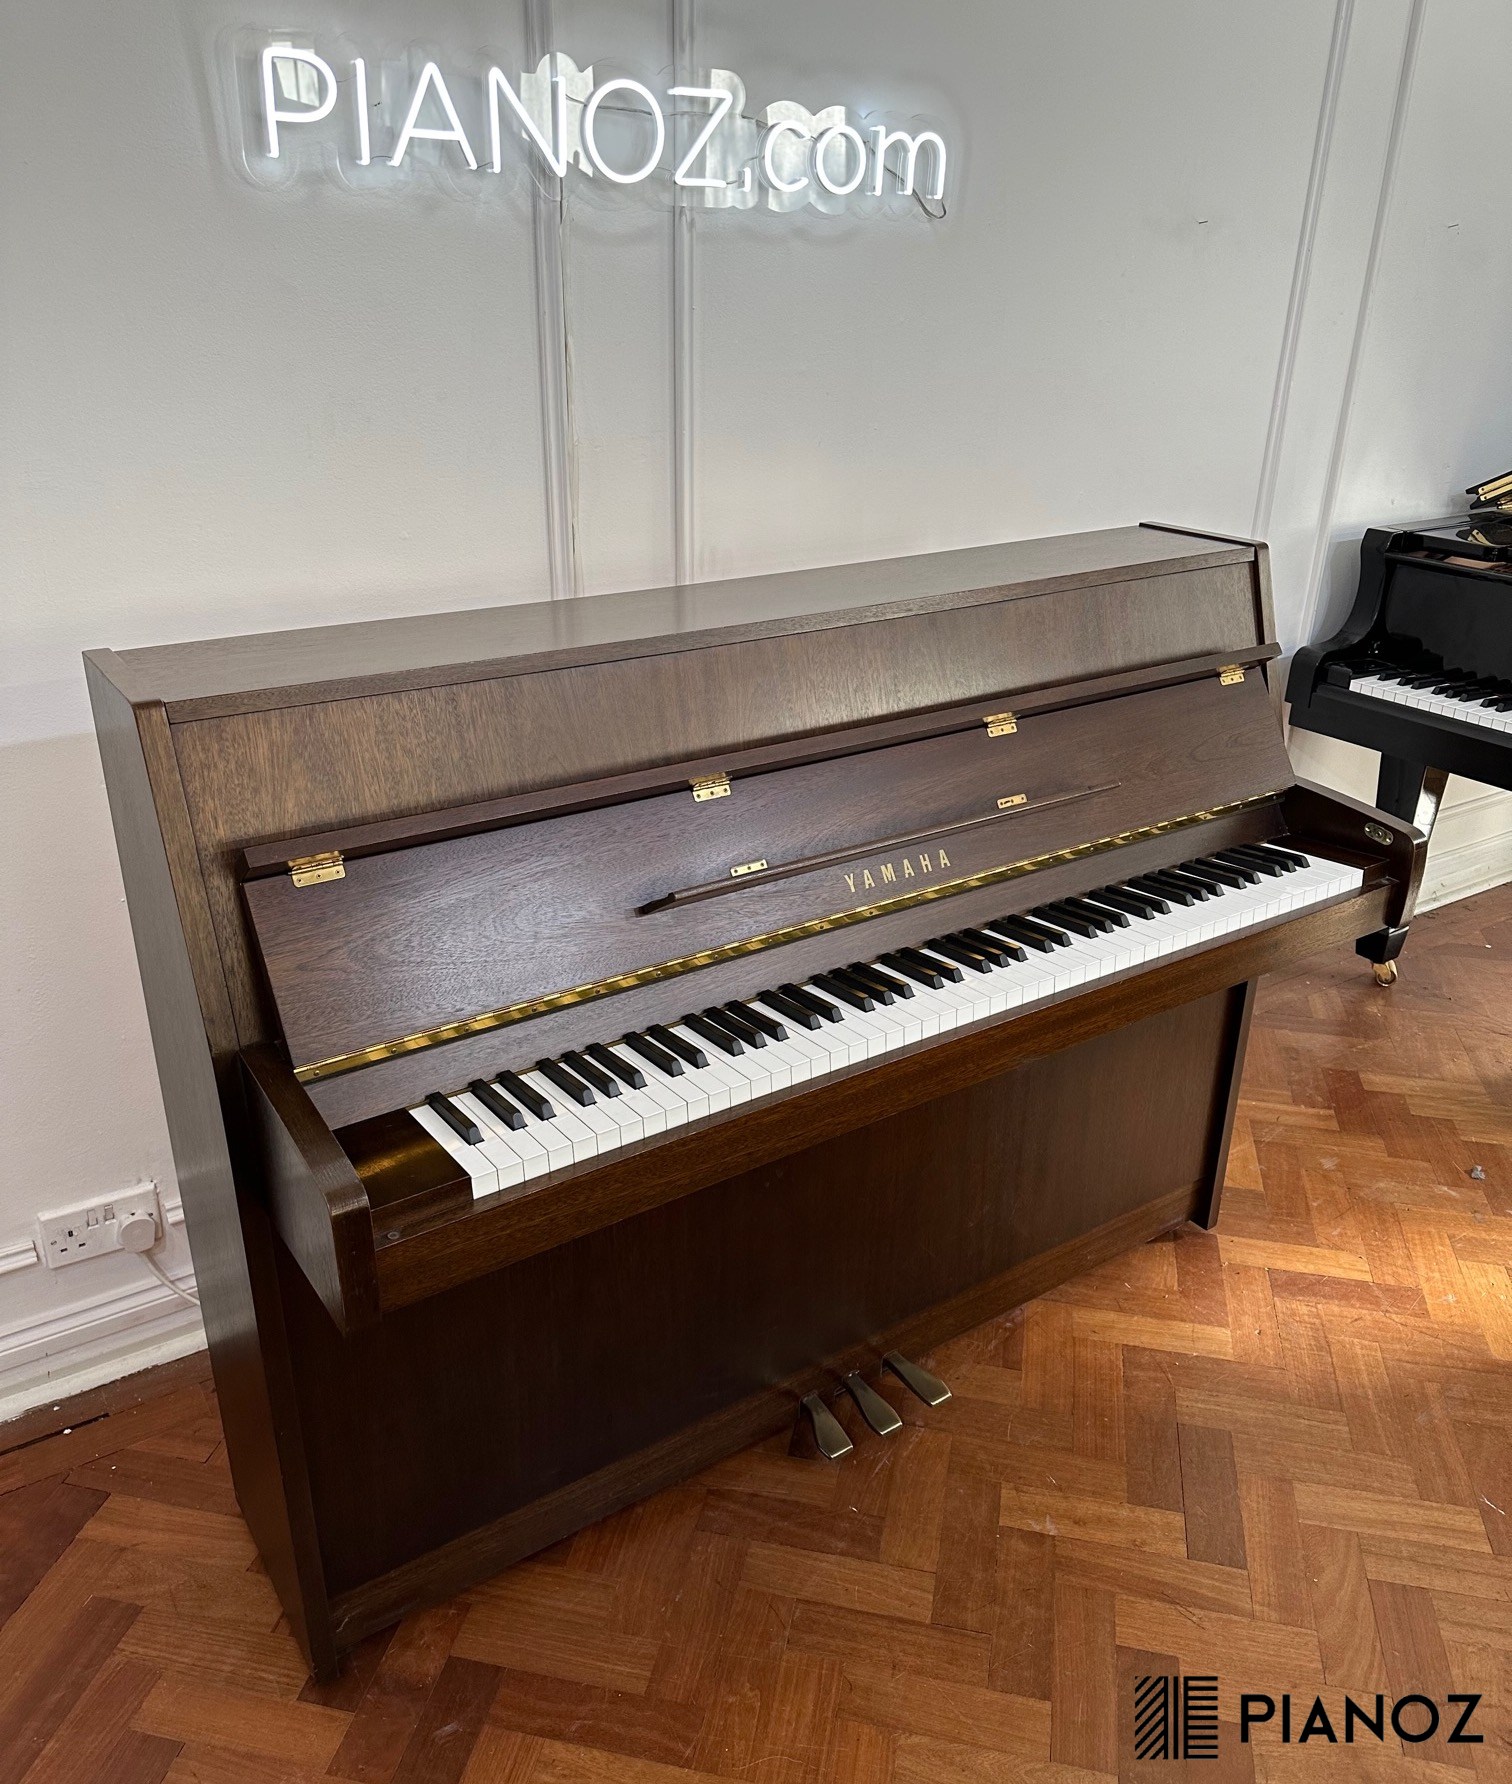 Yamaha E110 Japanese Upright Piano piano for sale in UK